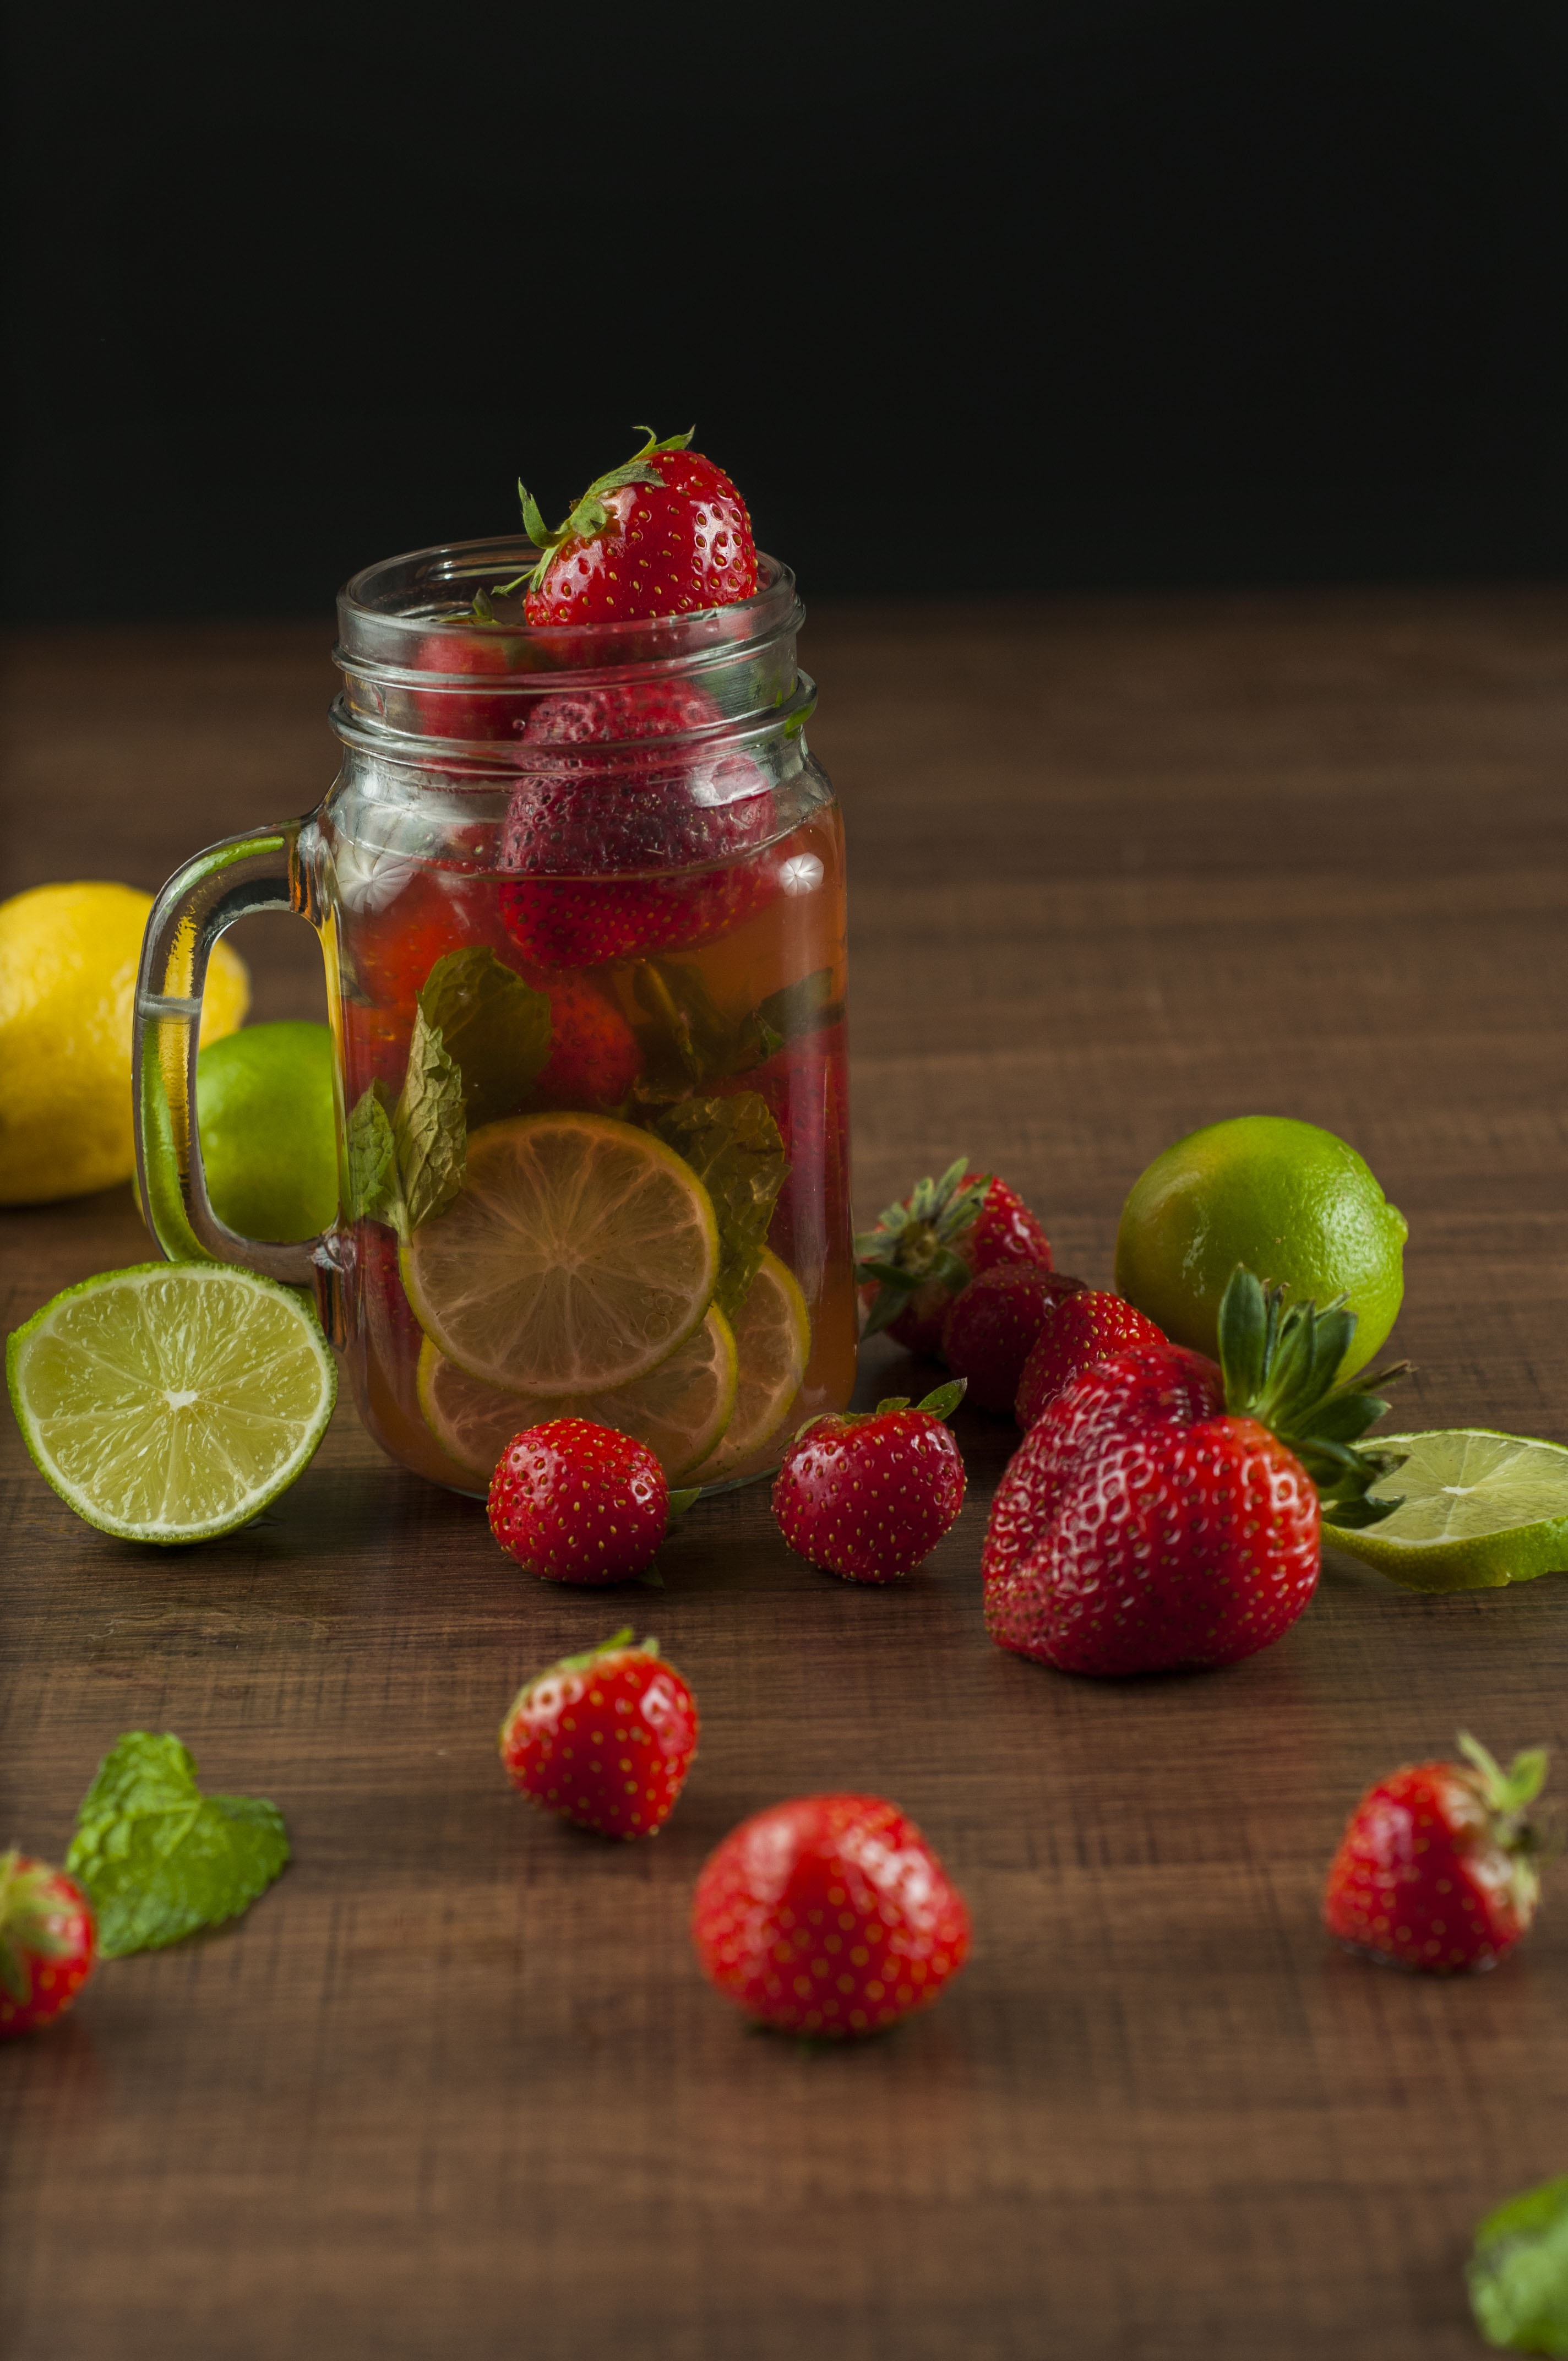 Use your creativity to create flavored water that is refreshing but has few calories. (Photo courtesy of Pixabay)